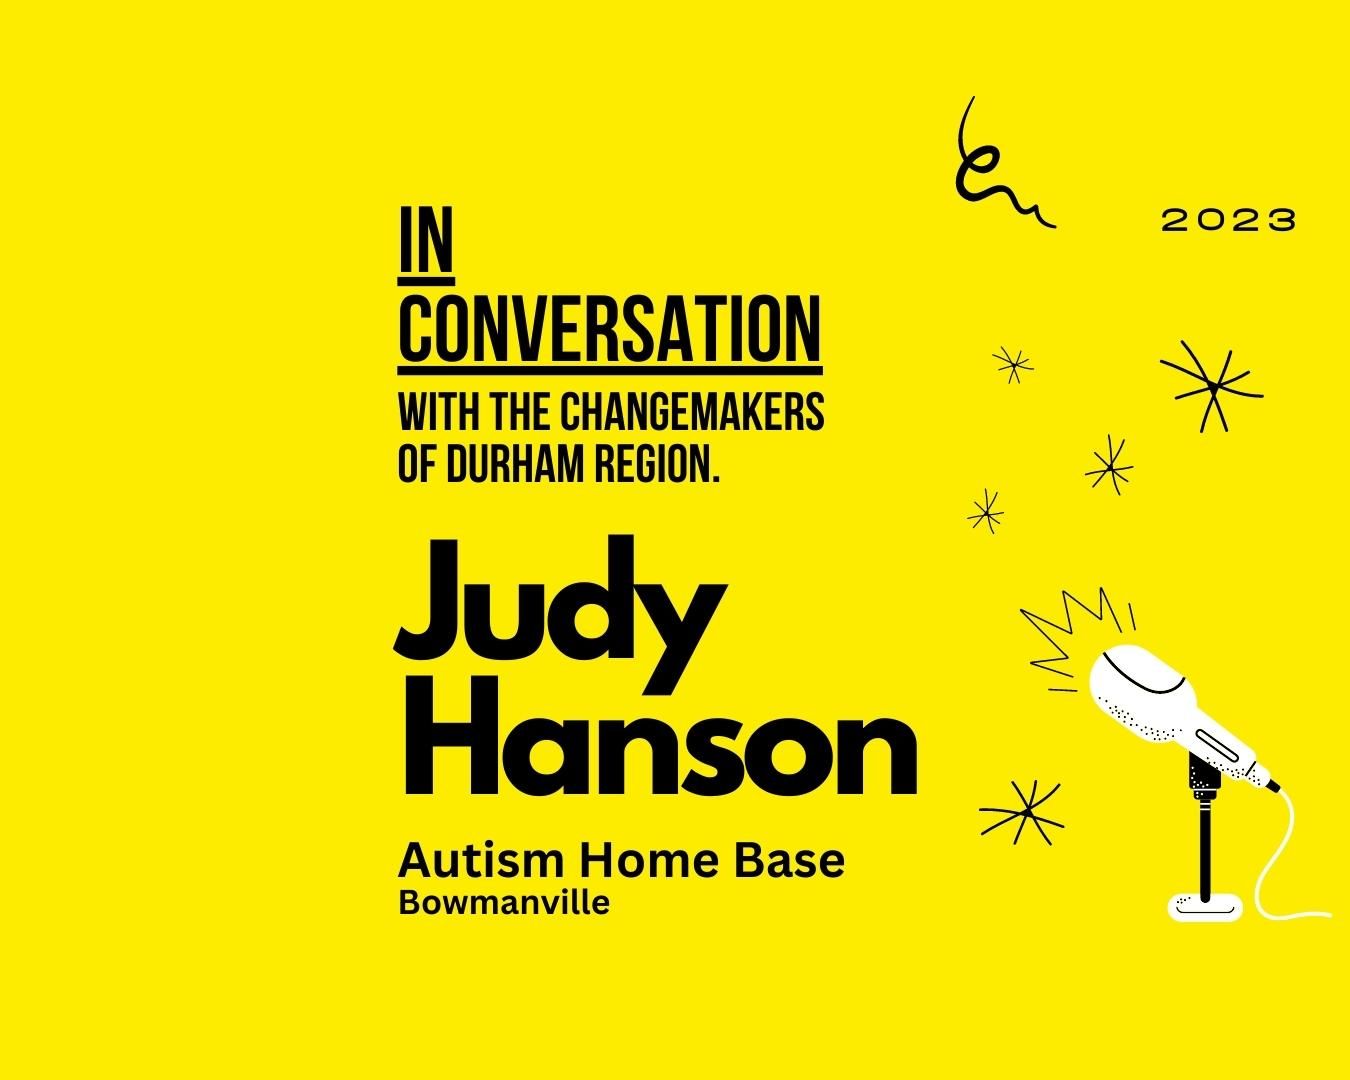 VODCAST: The Journey of Autism Home Base: A Success Story of Advocacy and Inclusion